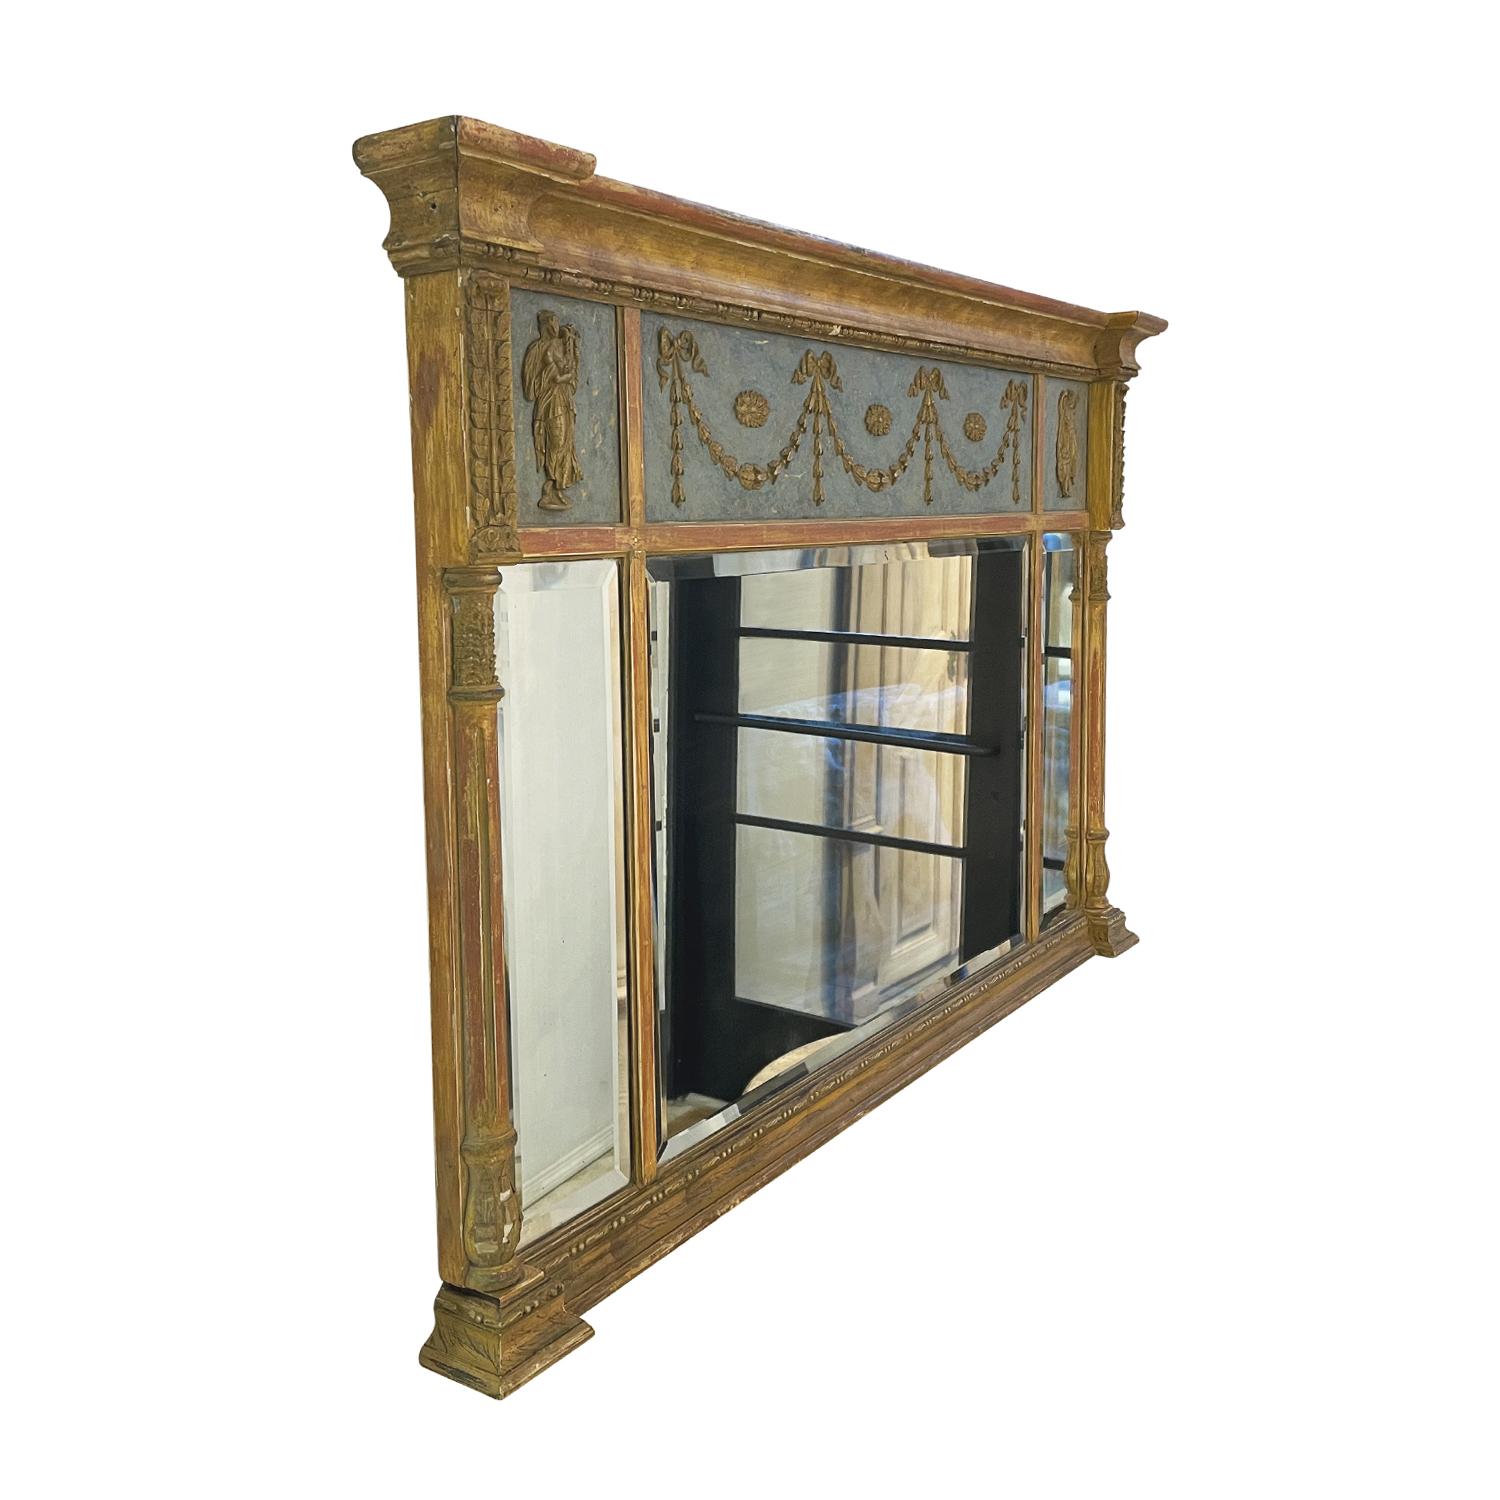 A gold, antique Swedish Gustavian rectangular wall mirror with its original mirror glass and blue color paint, made of handcrafted gilded Pinewood, in good condition. The wall decor piece was designed and produced by an unknown artist from